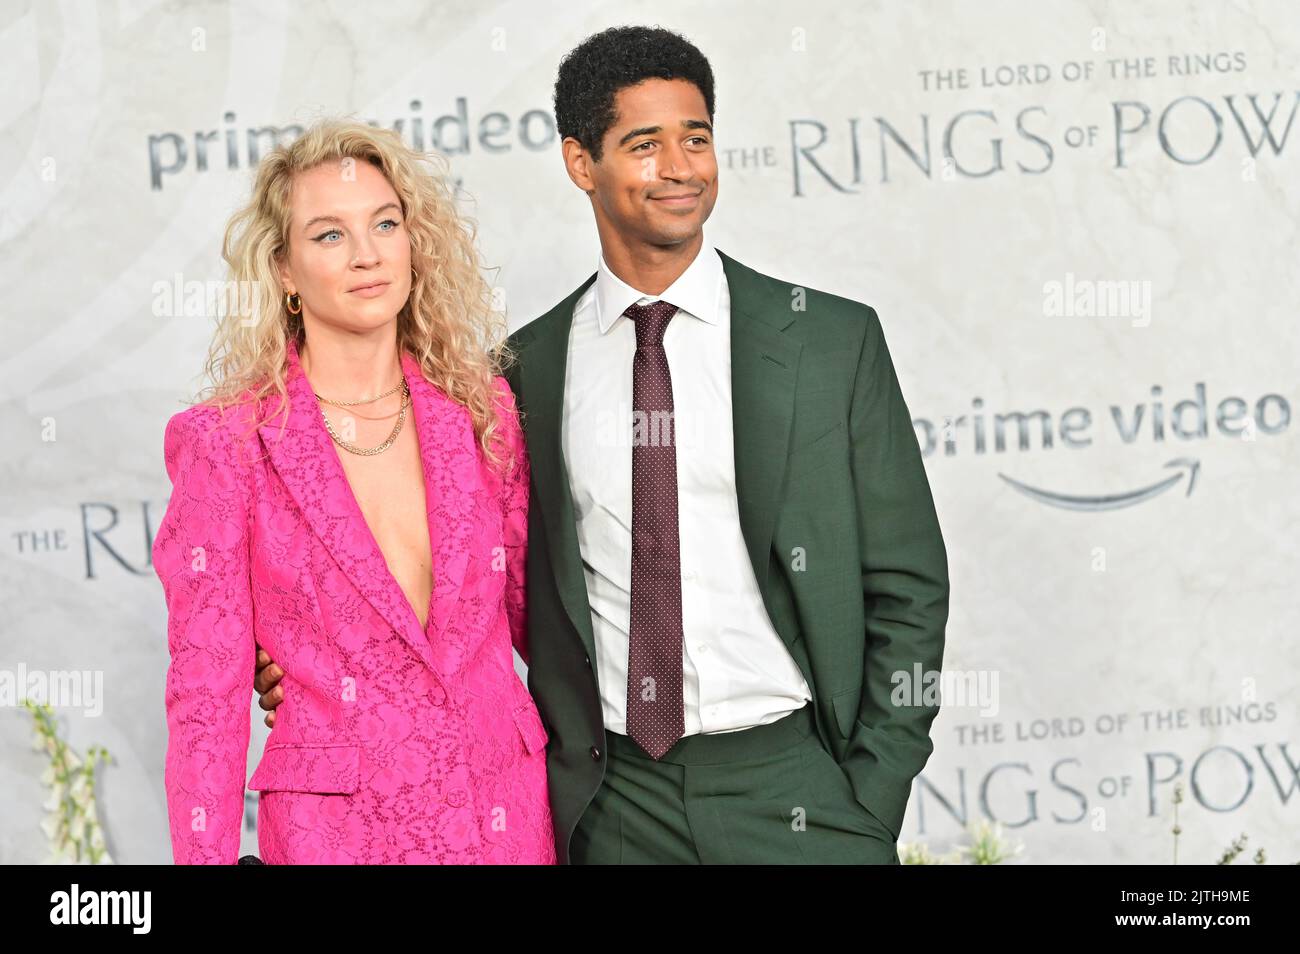 London, UK. - 30th August 2022. Alfie Enoch arrives at The Lord of the Rings: The Rings of Power' TV show premiere at the ODEON Luxe West End, Leicester square, London, UK. - 30th August 2022. Stock Photo